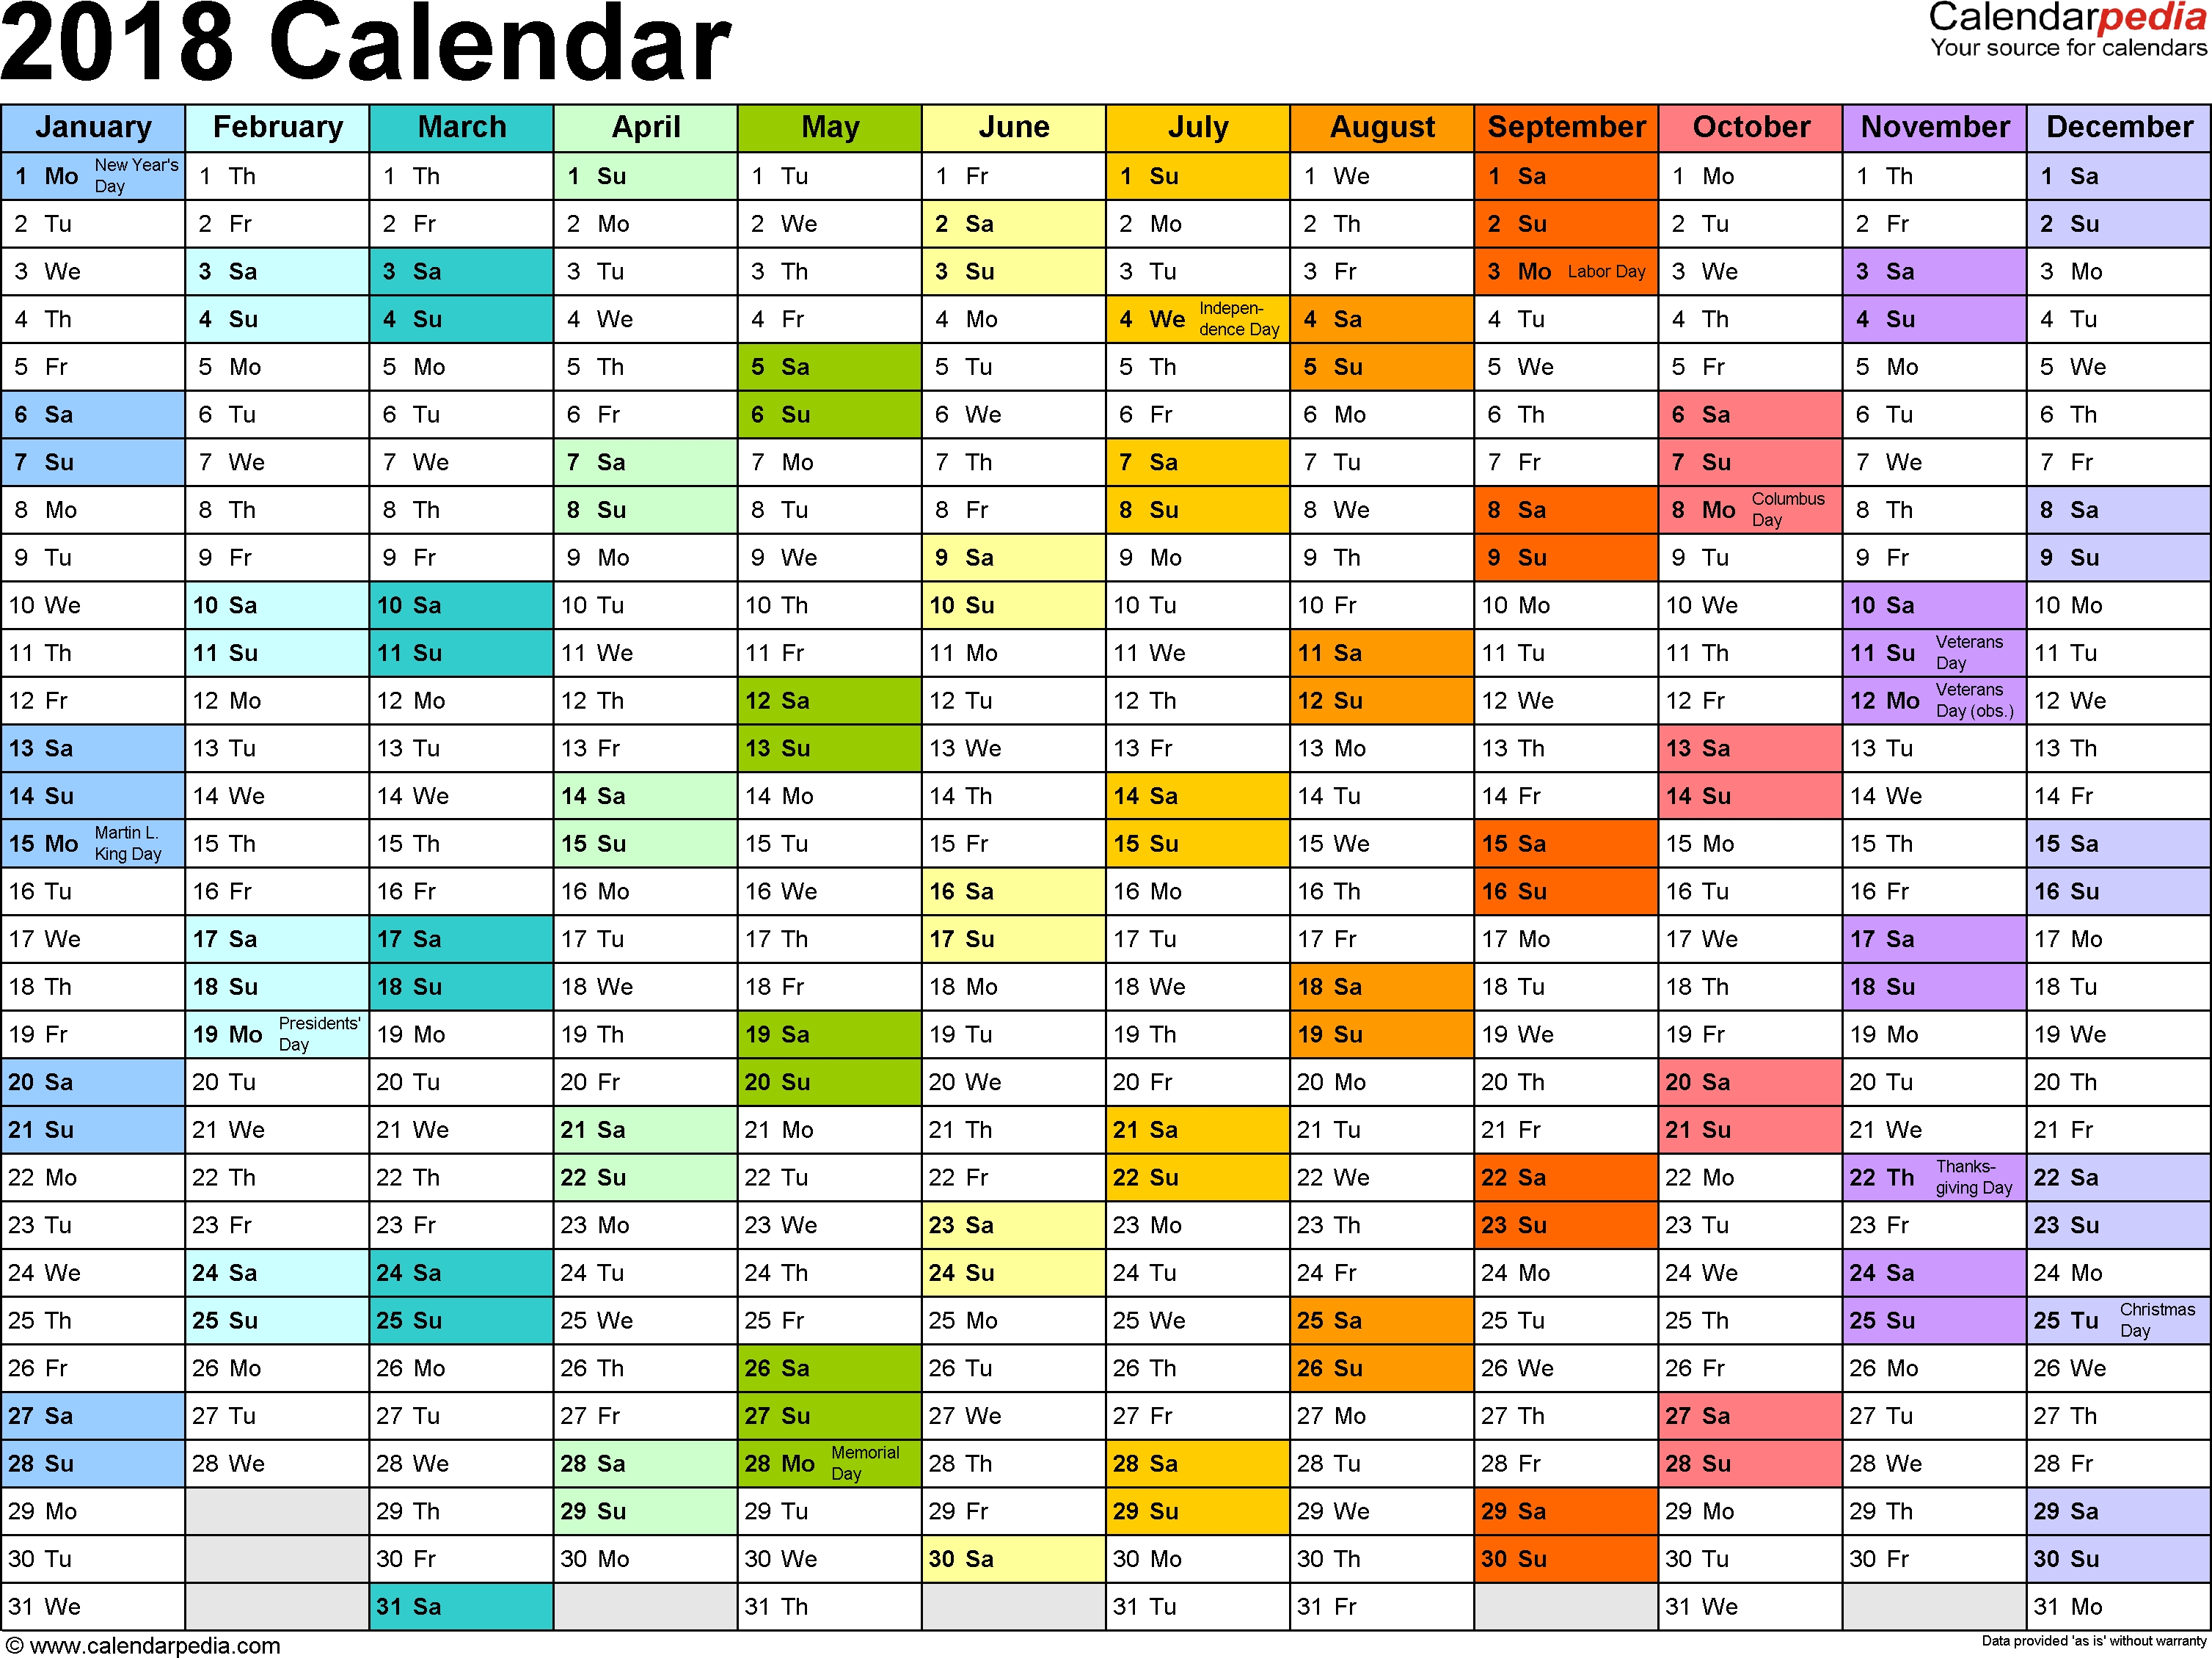 Vacation Calendar Template 2018 - Yeniscale.co  Year At A Glance Calendar - Vacation Schedule For Staff